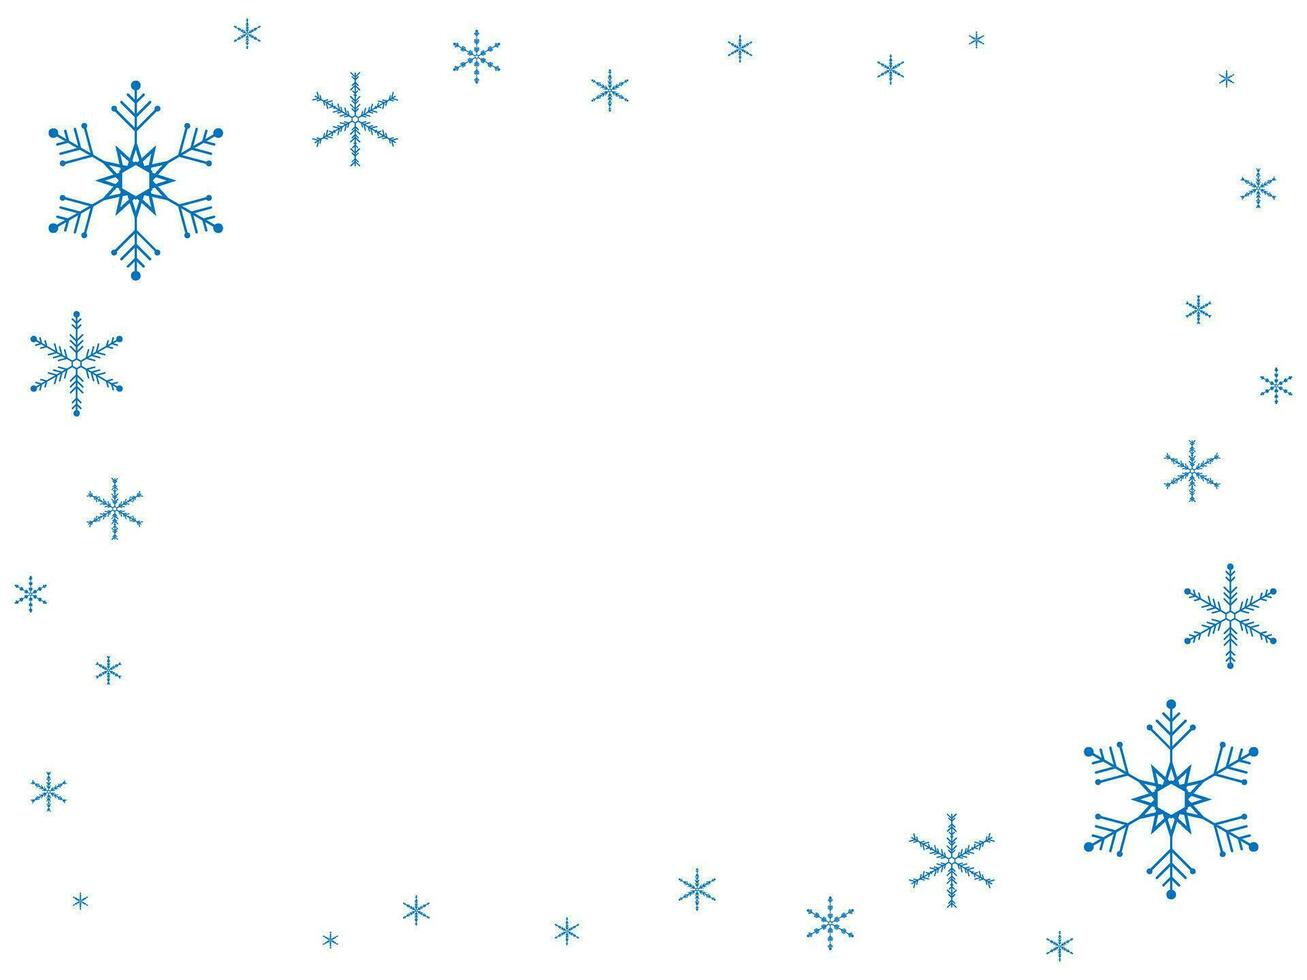 Abstract background with blue snowflakes in the corners. Vector illustration with copy space for text